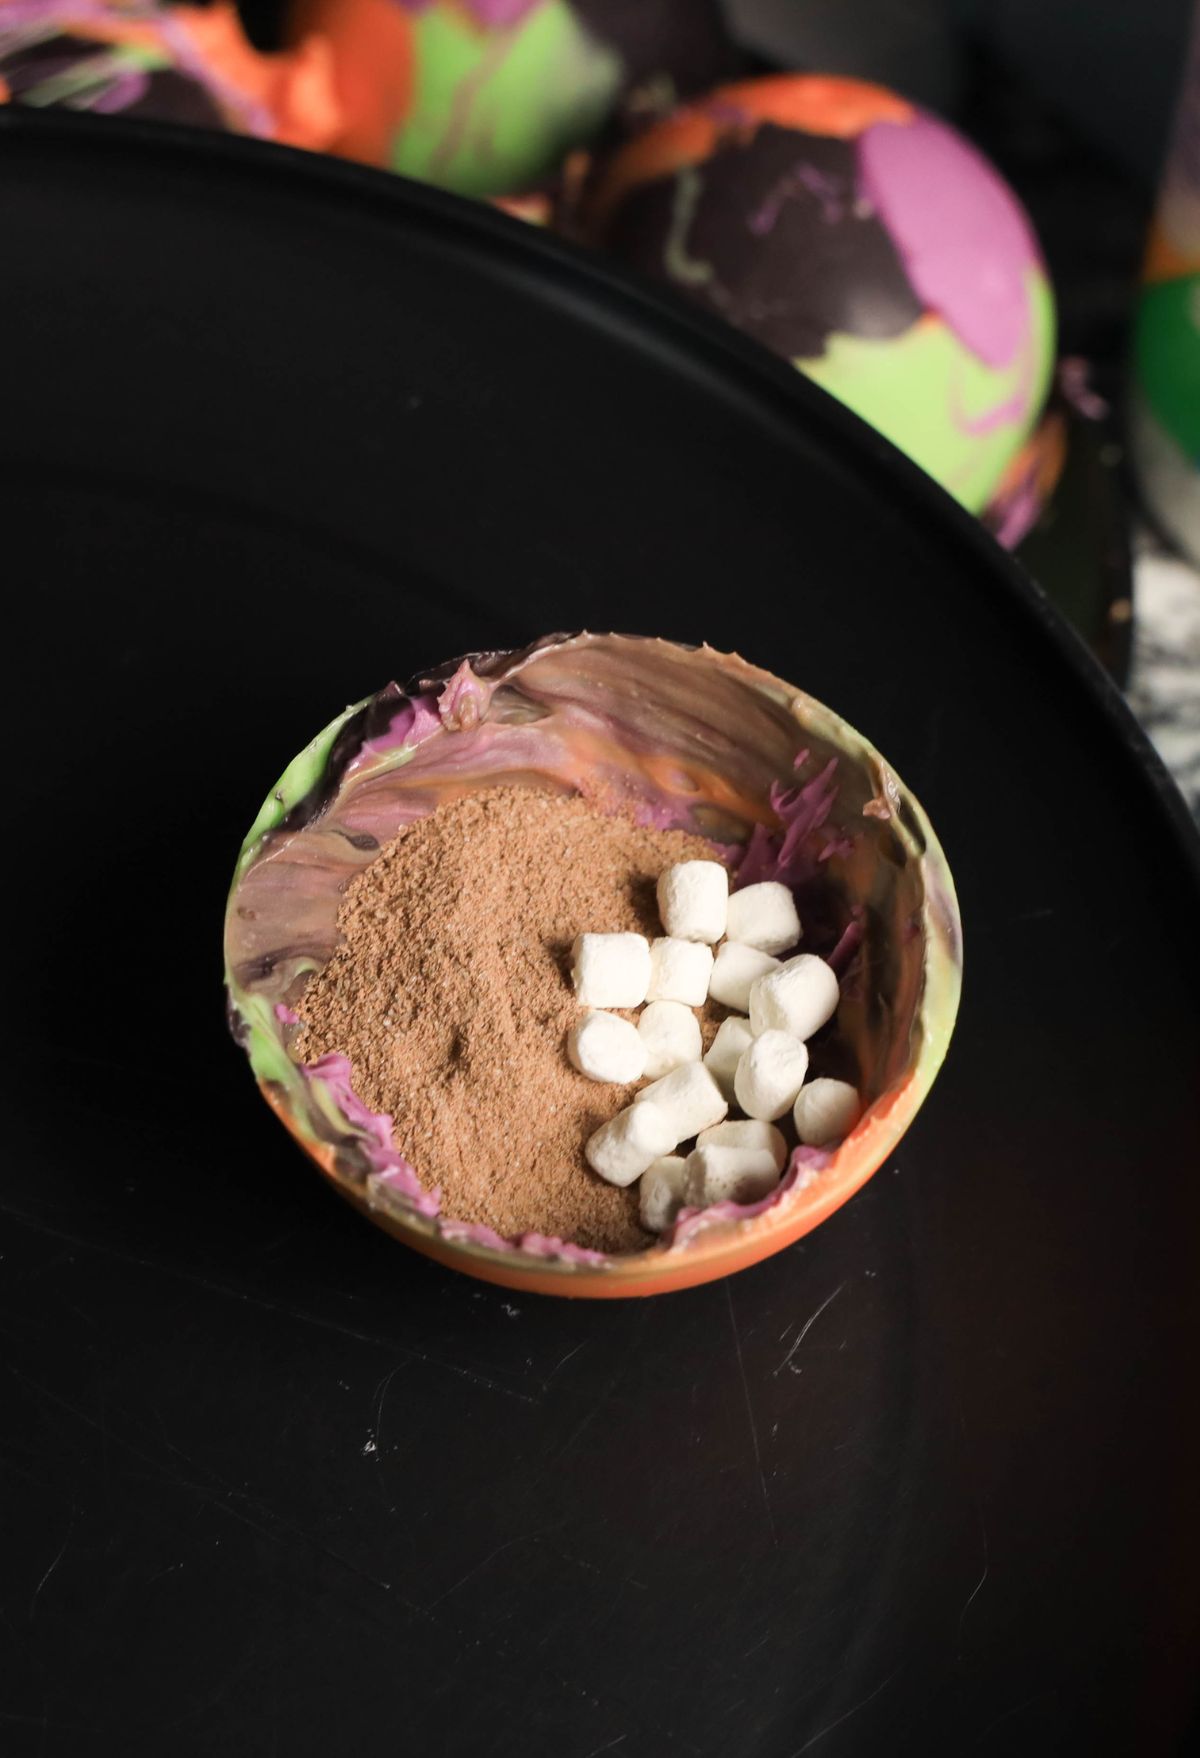 A bowl filled with marshmallows and powder.